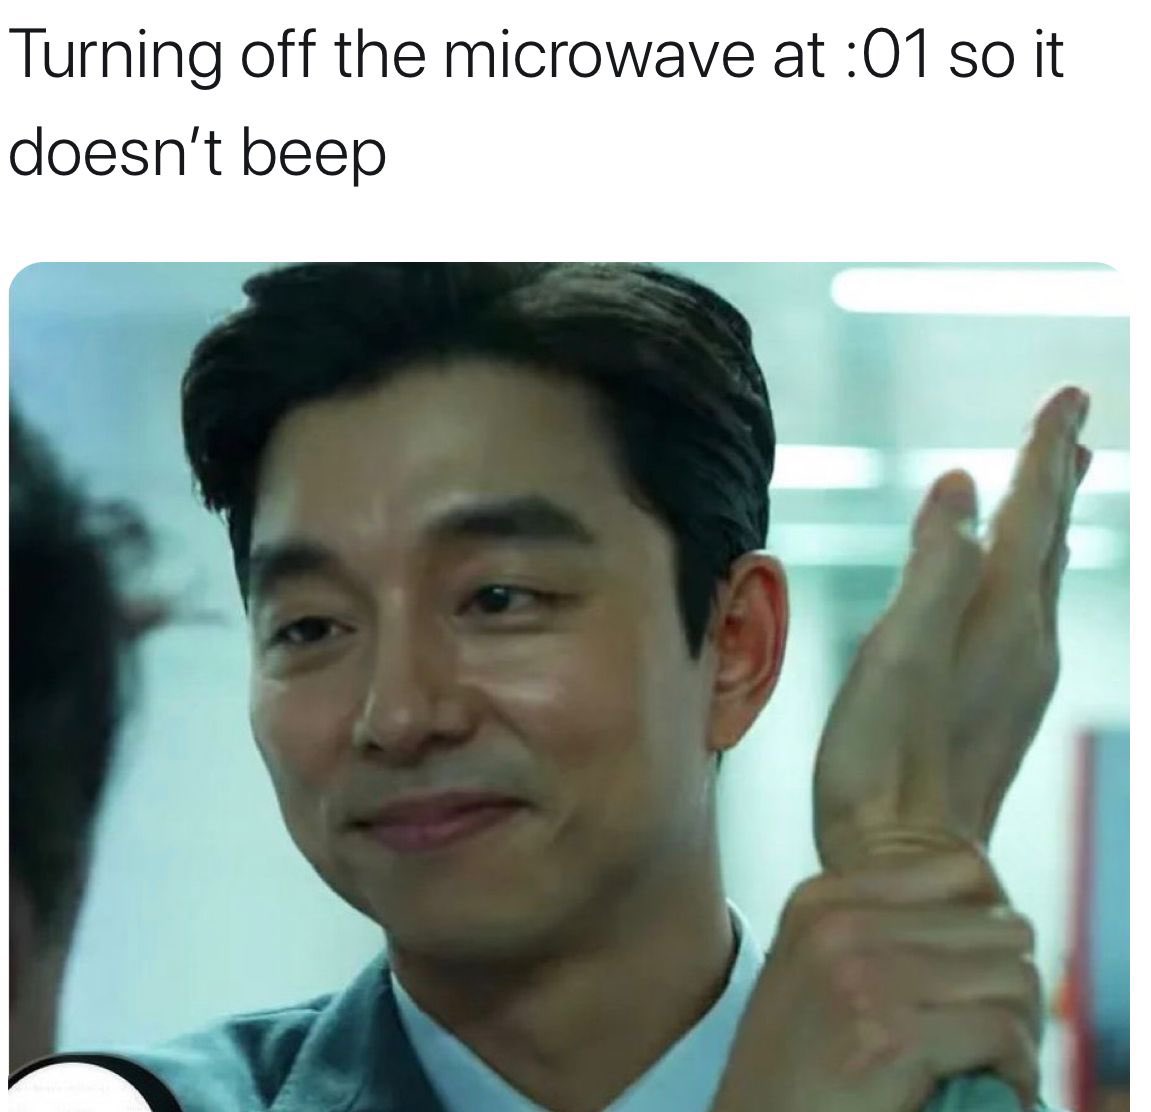 gong yoo - Turning off the microwave at 01 so it doesn't beep